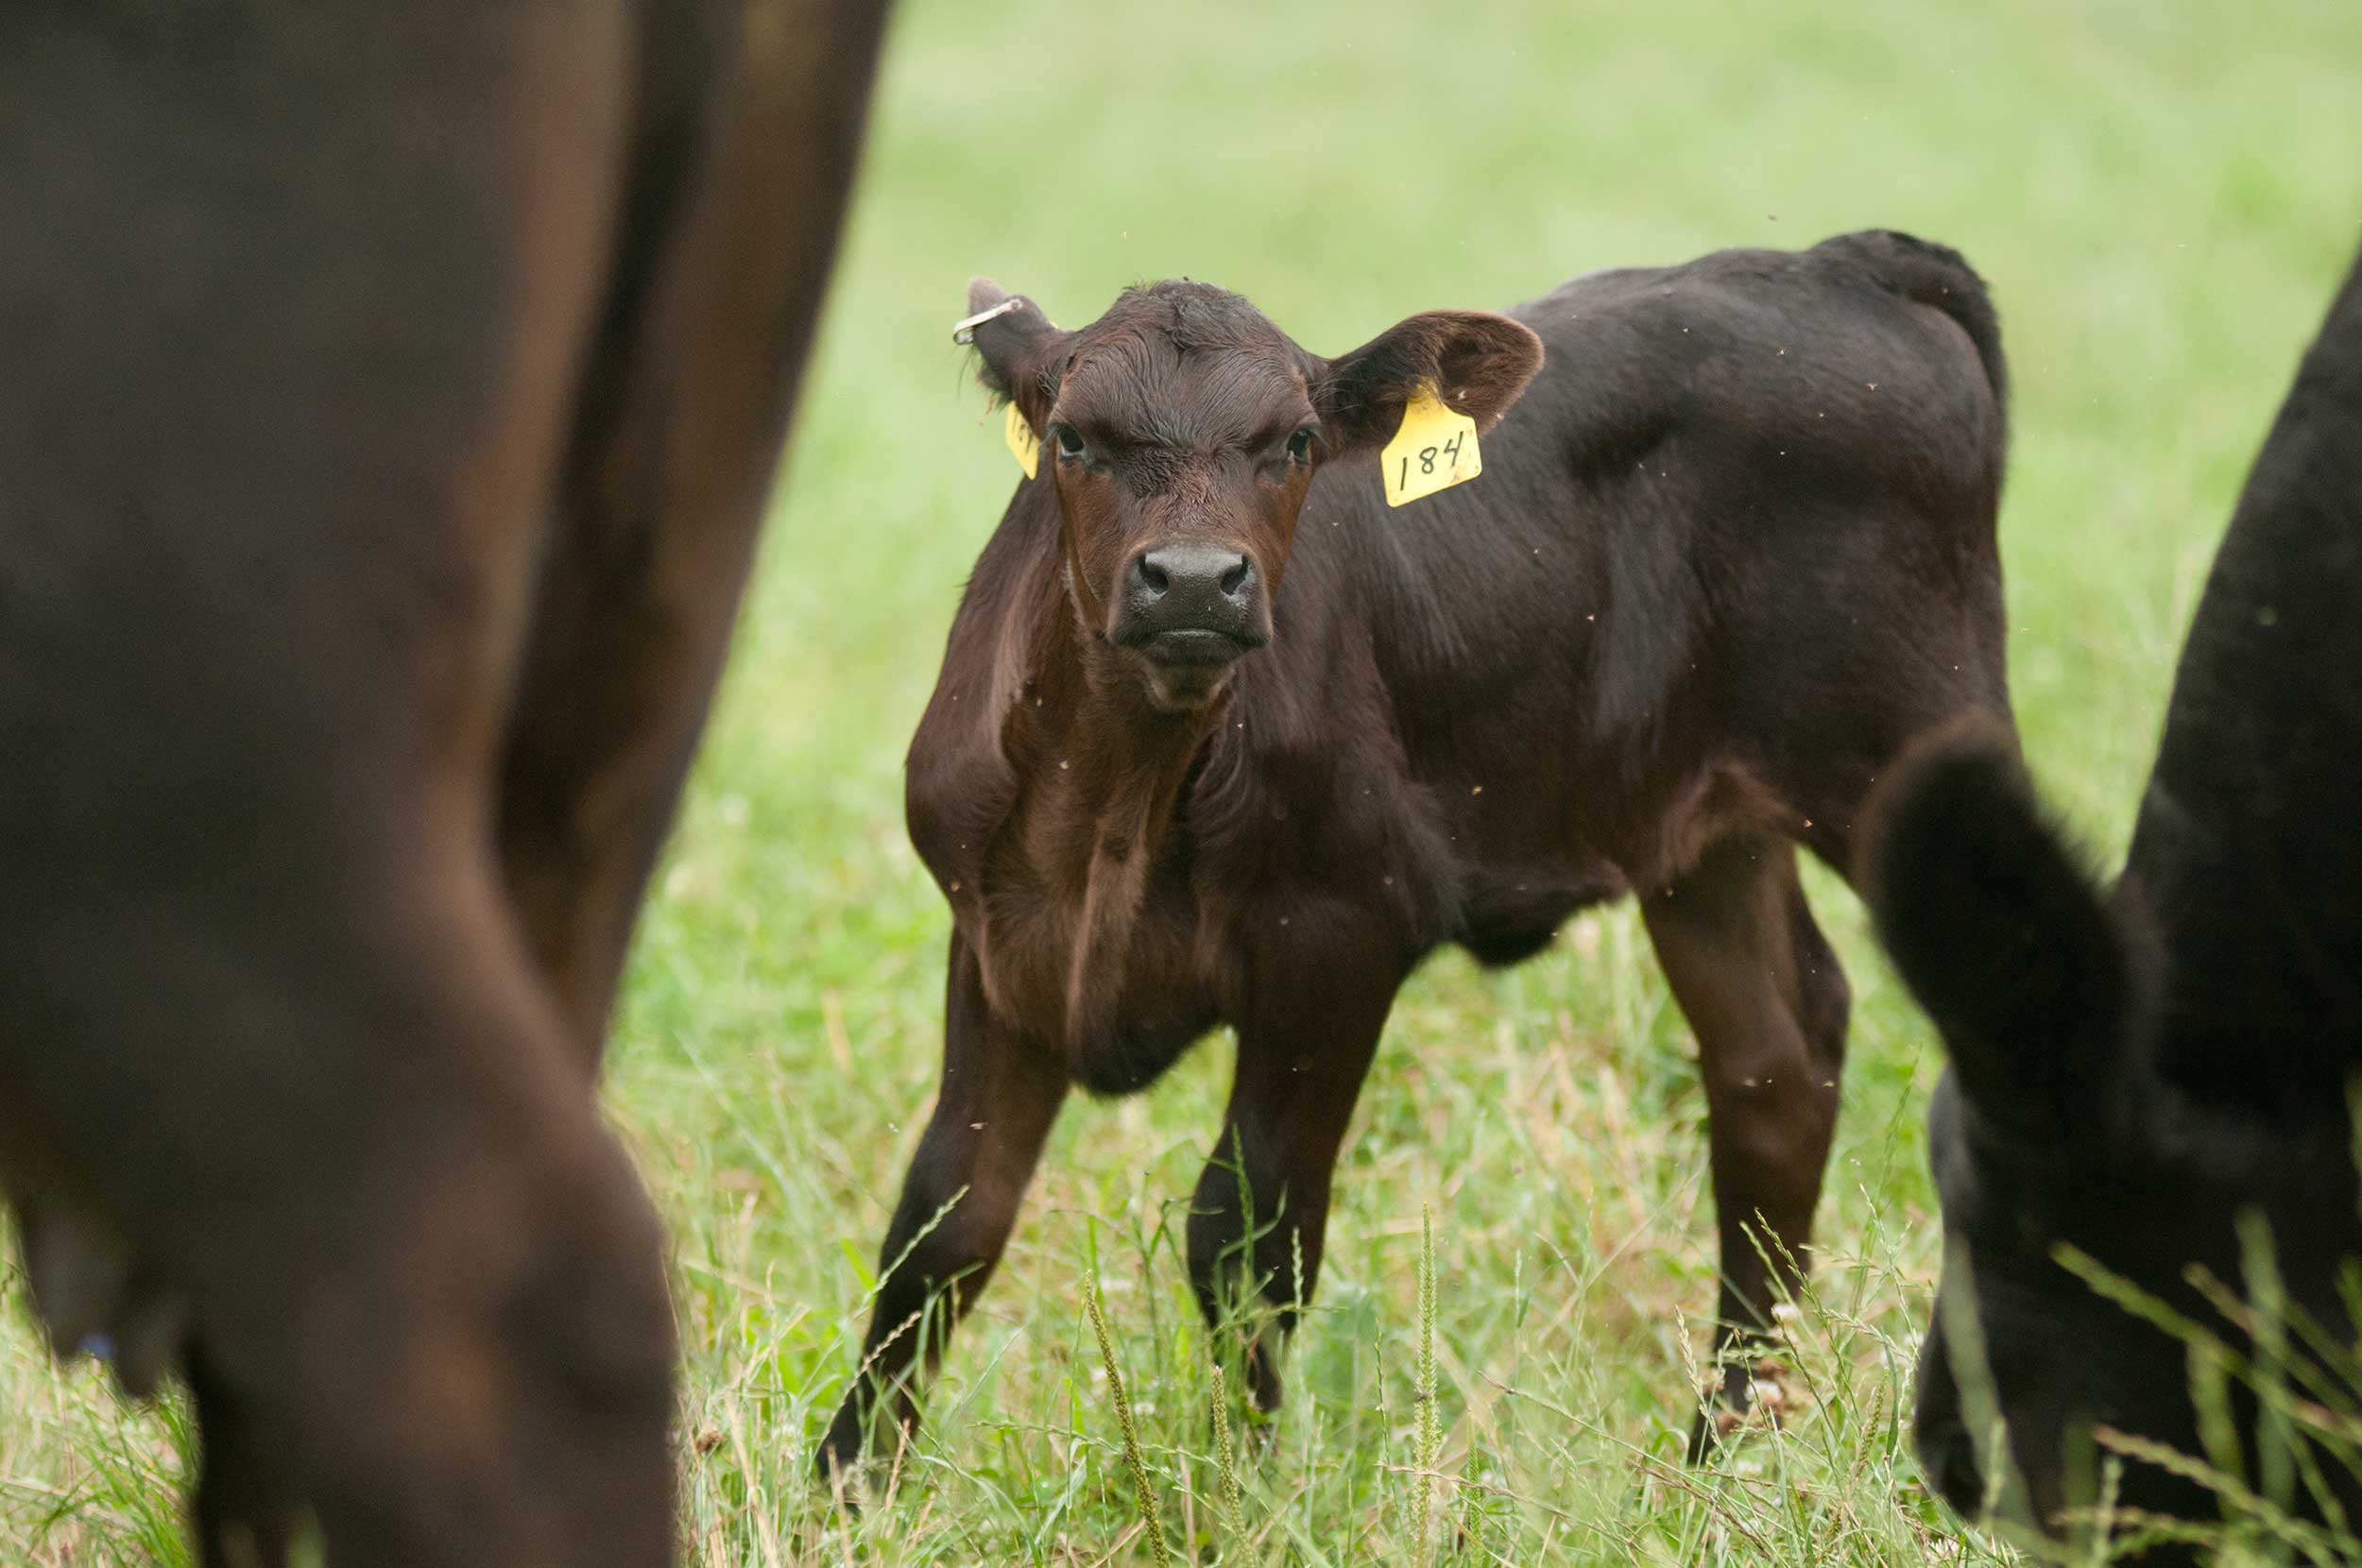 A black angus calf in standing in a pasture between two cows.